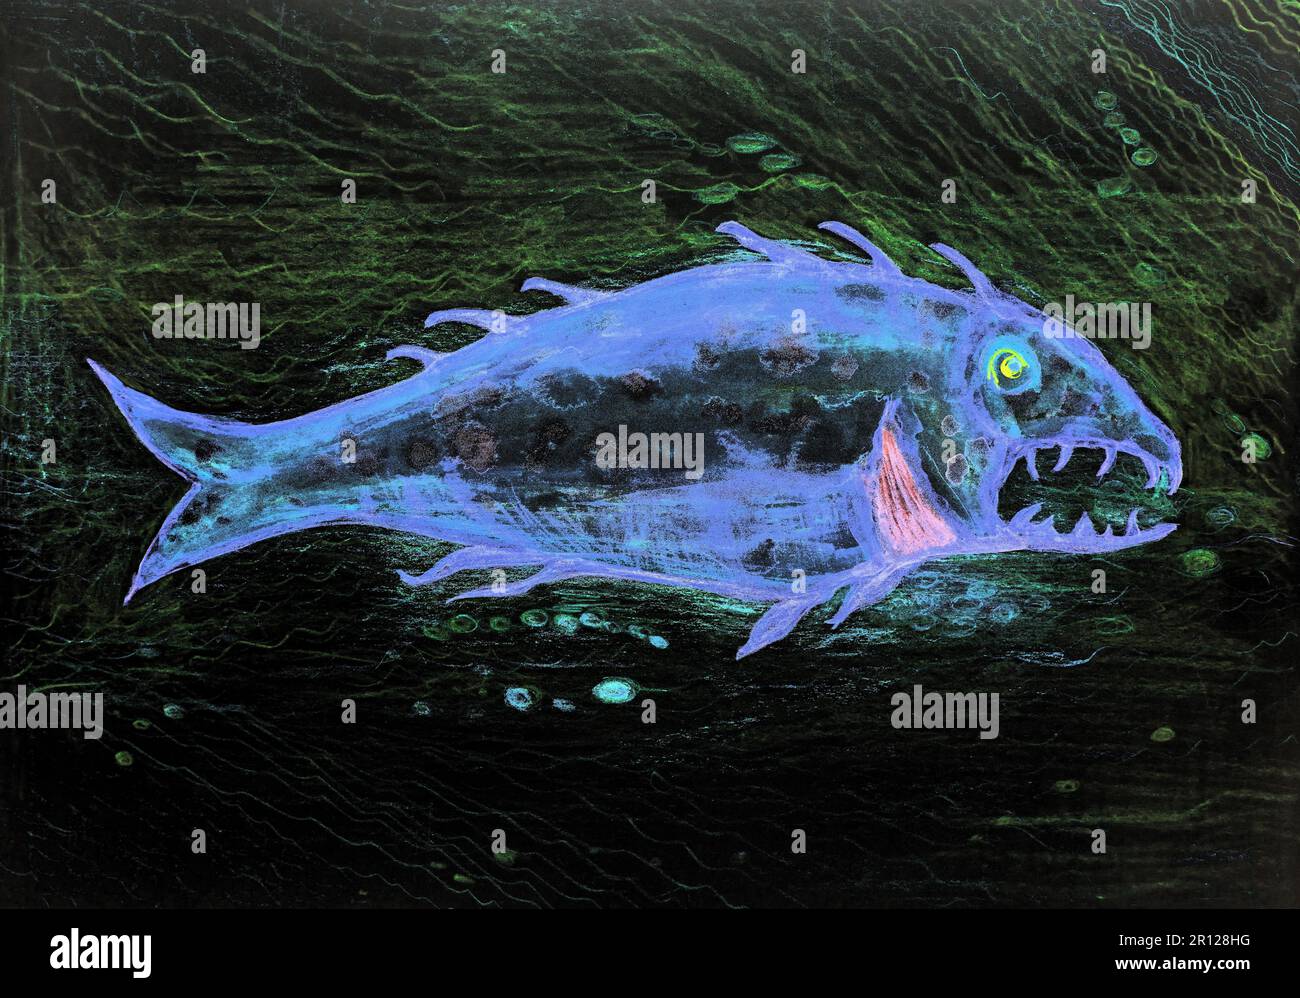 Psychedelic big blue fish in greenish water. The dabbing technique near the edges gives a soft focus effect due to the altered surface roughness of th Stock Photo